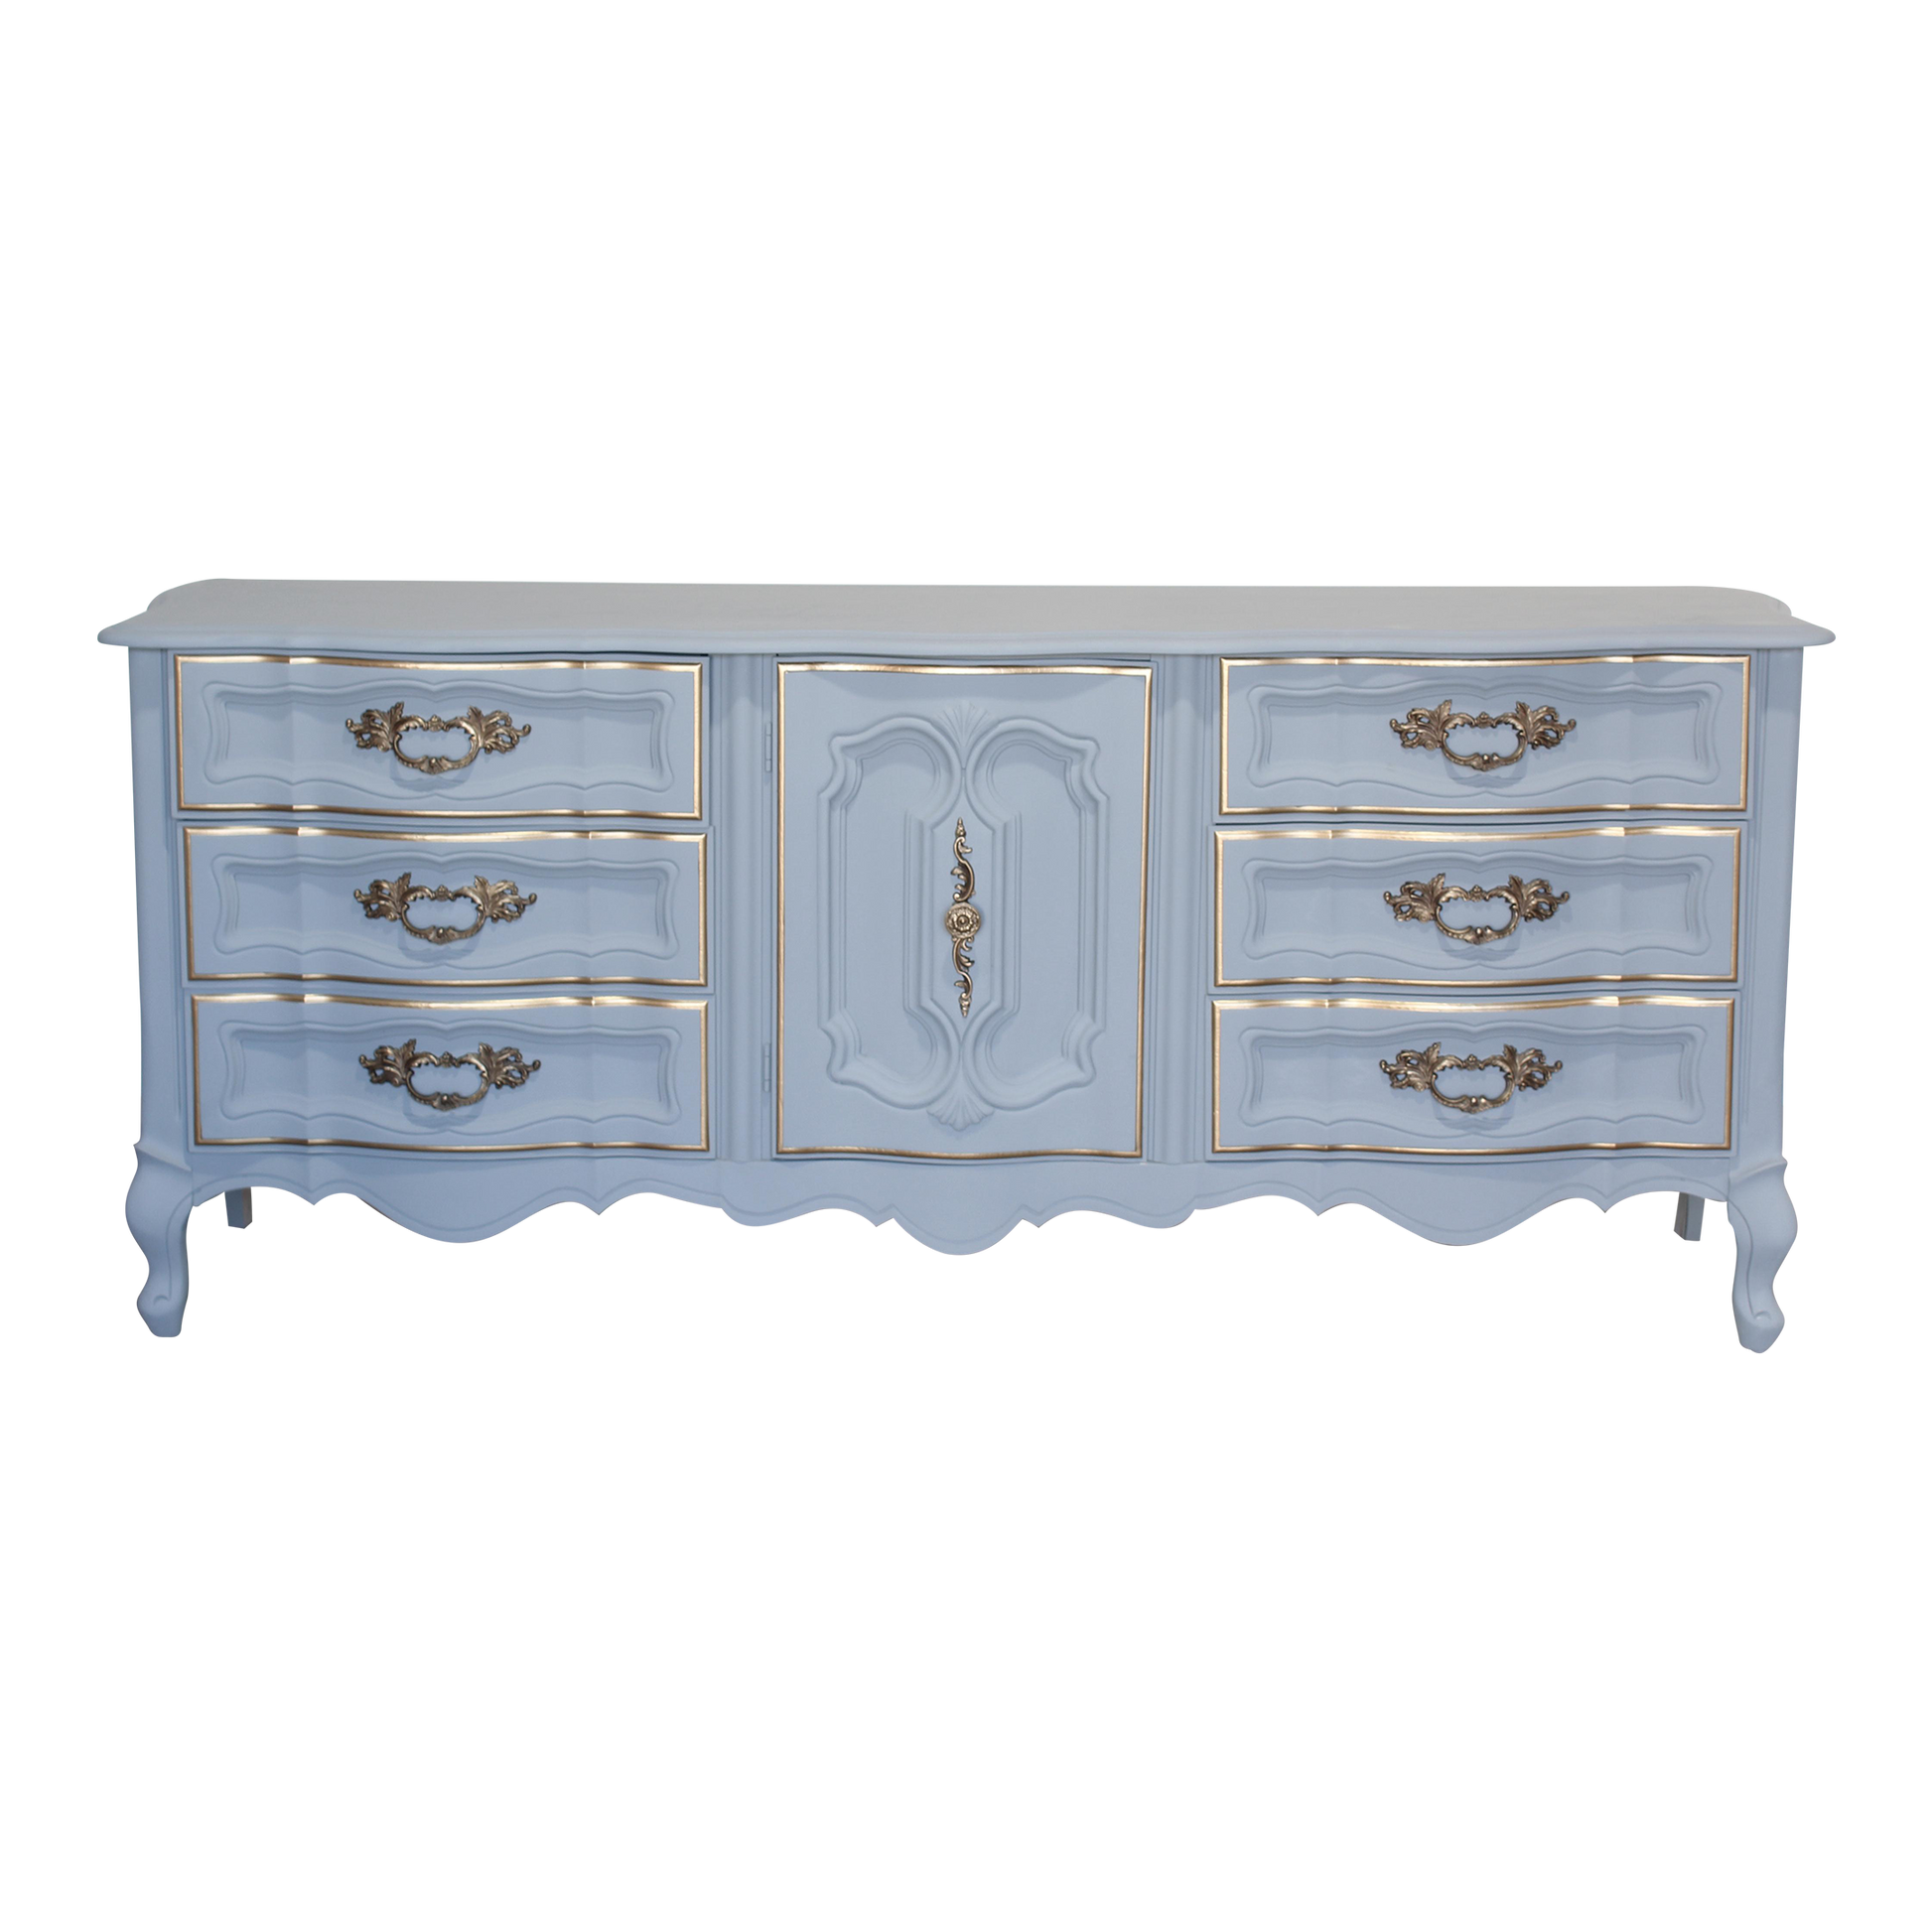 Vintage French provincial dresser of nine drawers.  This is a solid built dresser with dovetail joints, professionally refinished in gray with gold painted accents.  Dimensions; 72" Width x 19" Depth x 31" Height. 